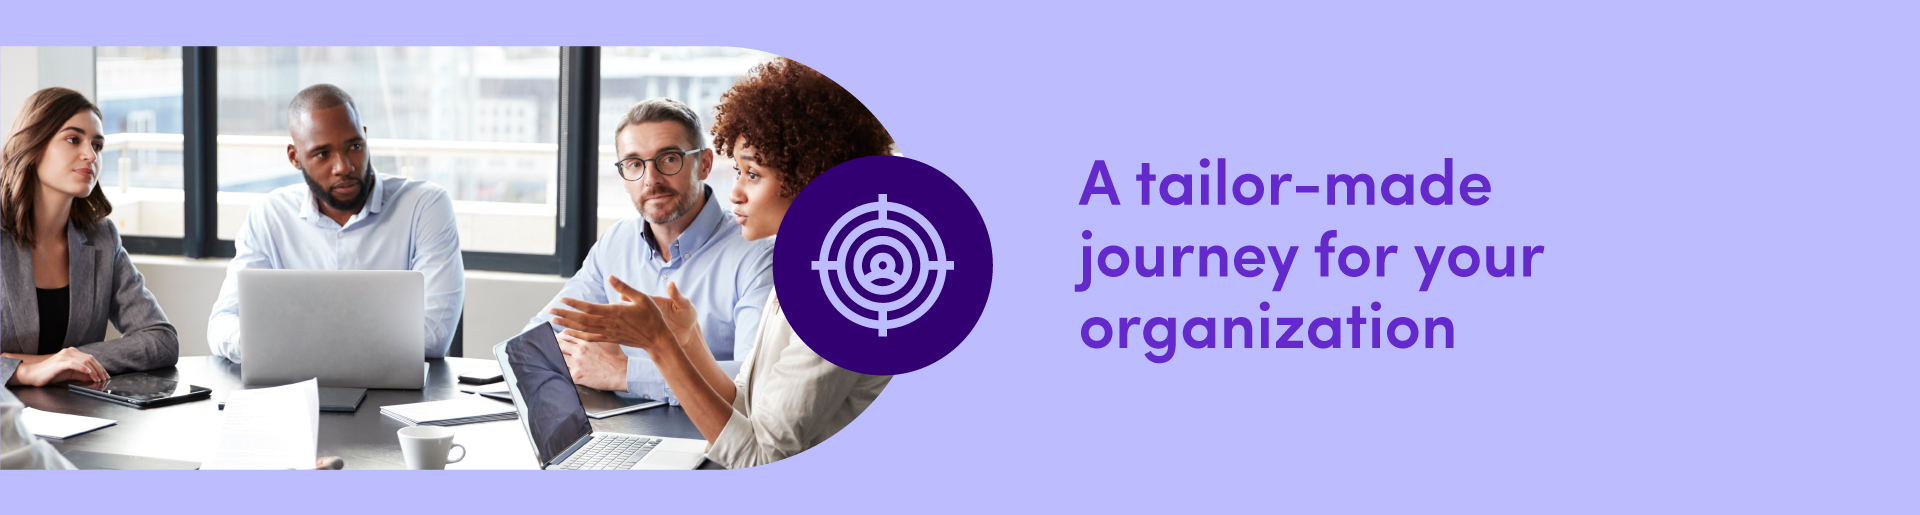 2-A-tailor-made-journey-for-your-organization